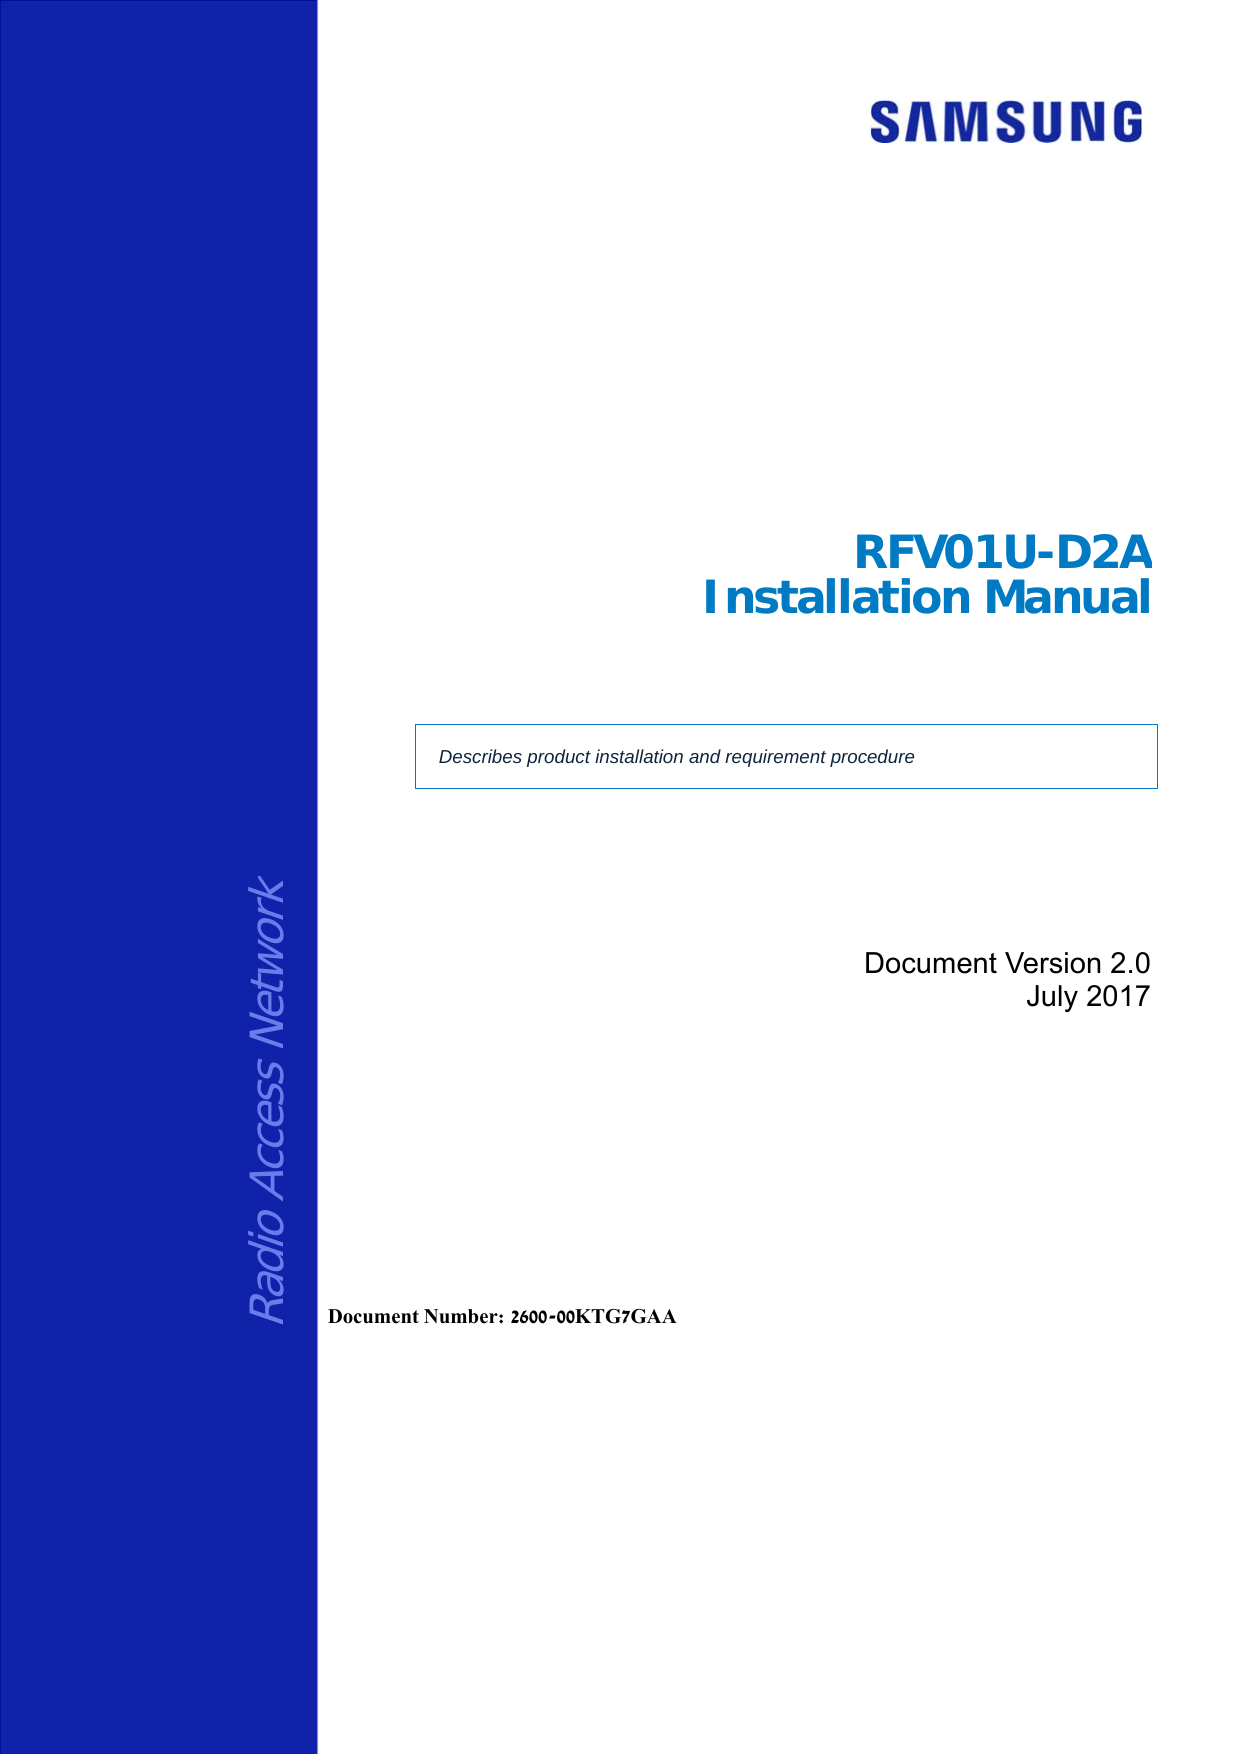     Radio Access Network RFV01U-D2AInstallation Manual  Describes product installation and requirement procedure Document Version 2.0 July 2017      Document Number: 2600-00KTG7GAA 